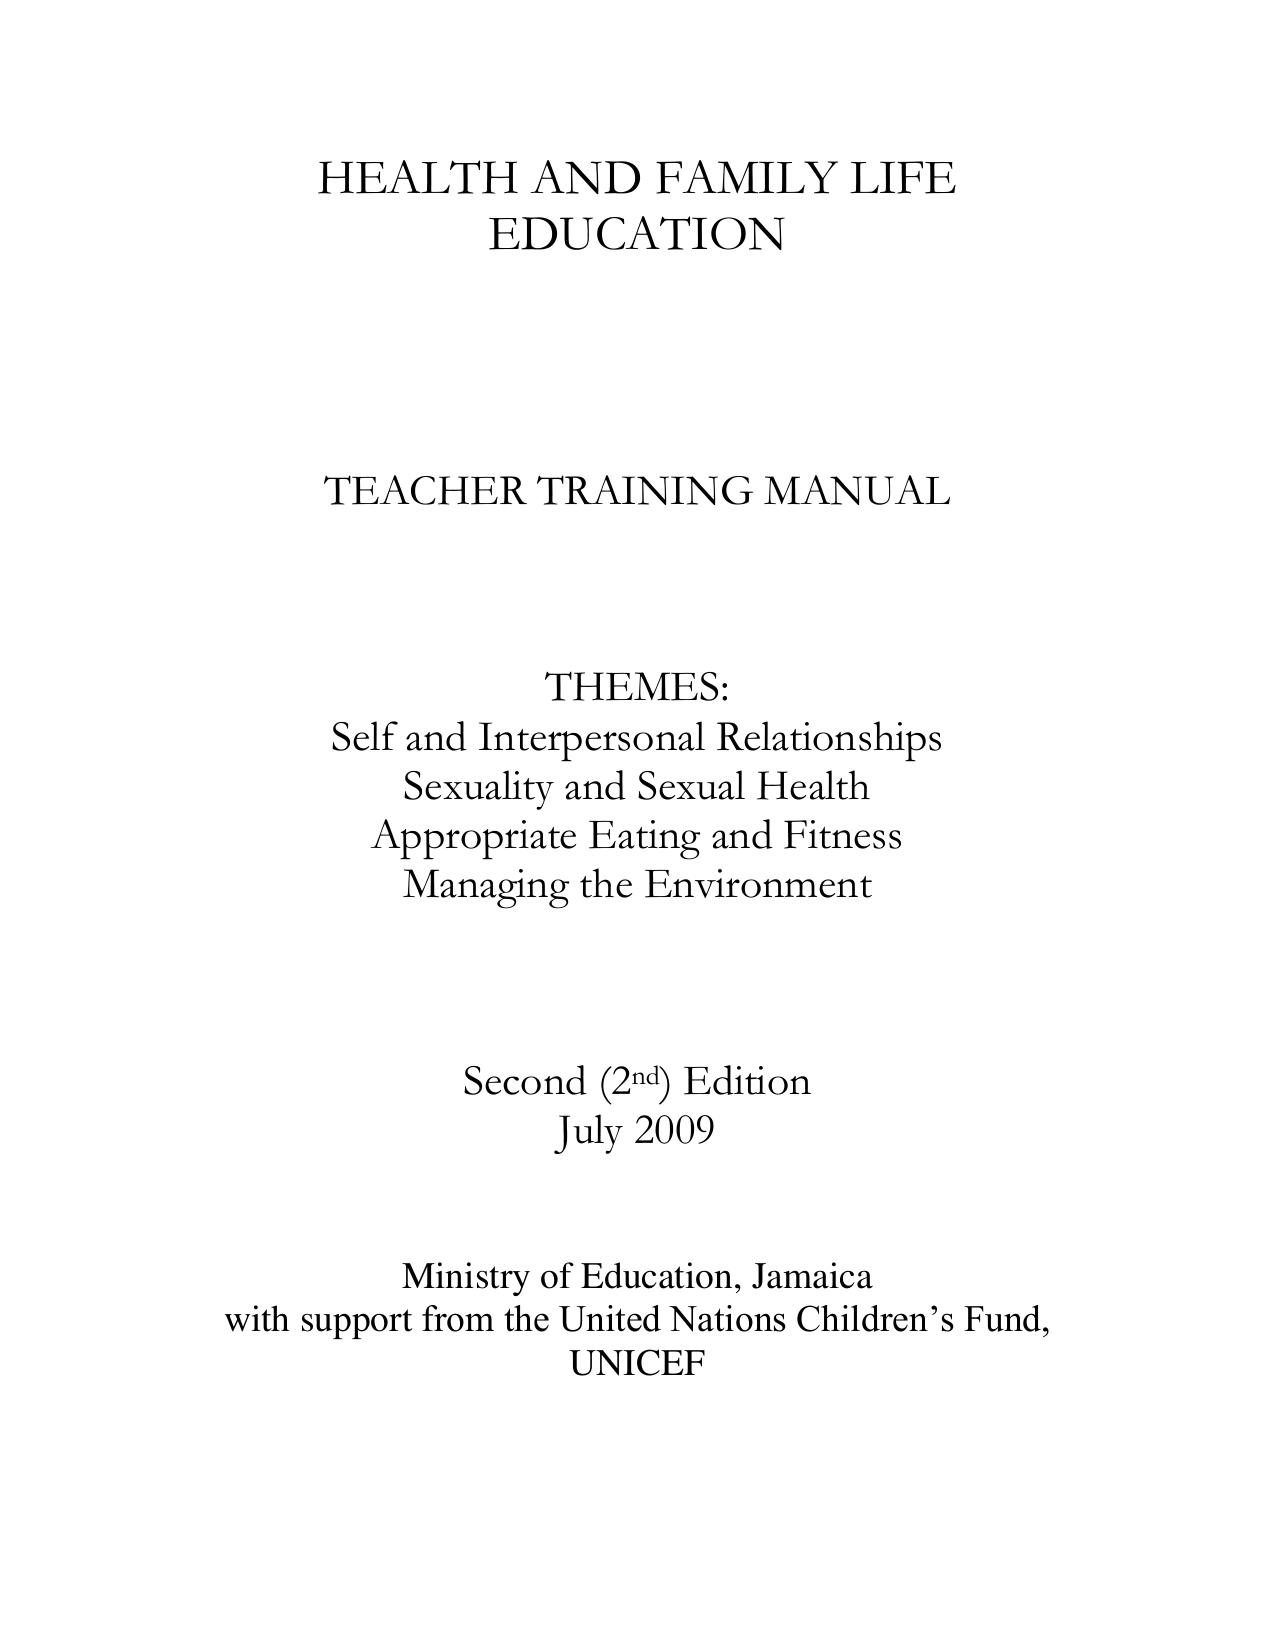 HEALTH AND FAMILY LIFE EDUCATION 2009